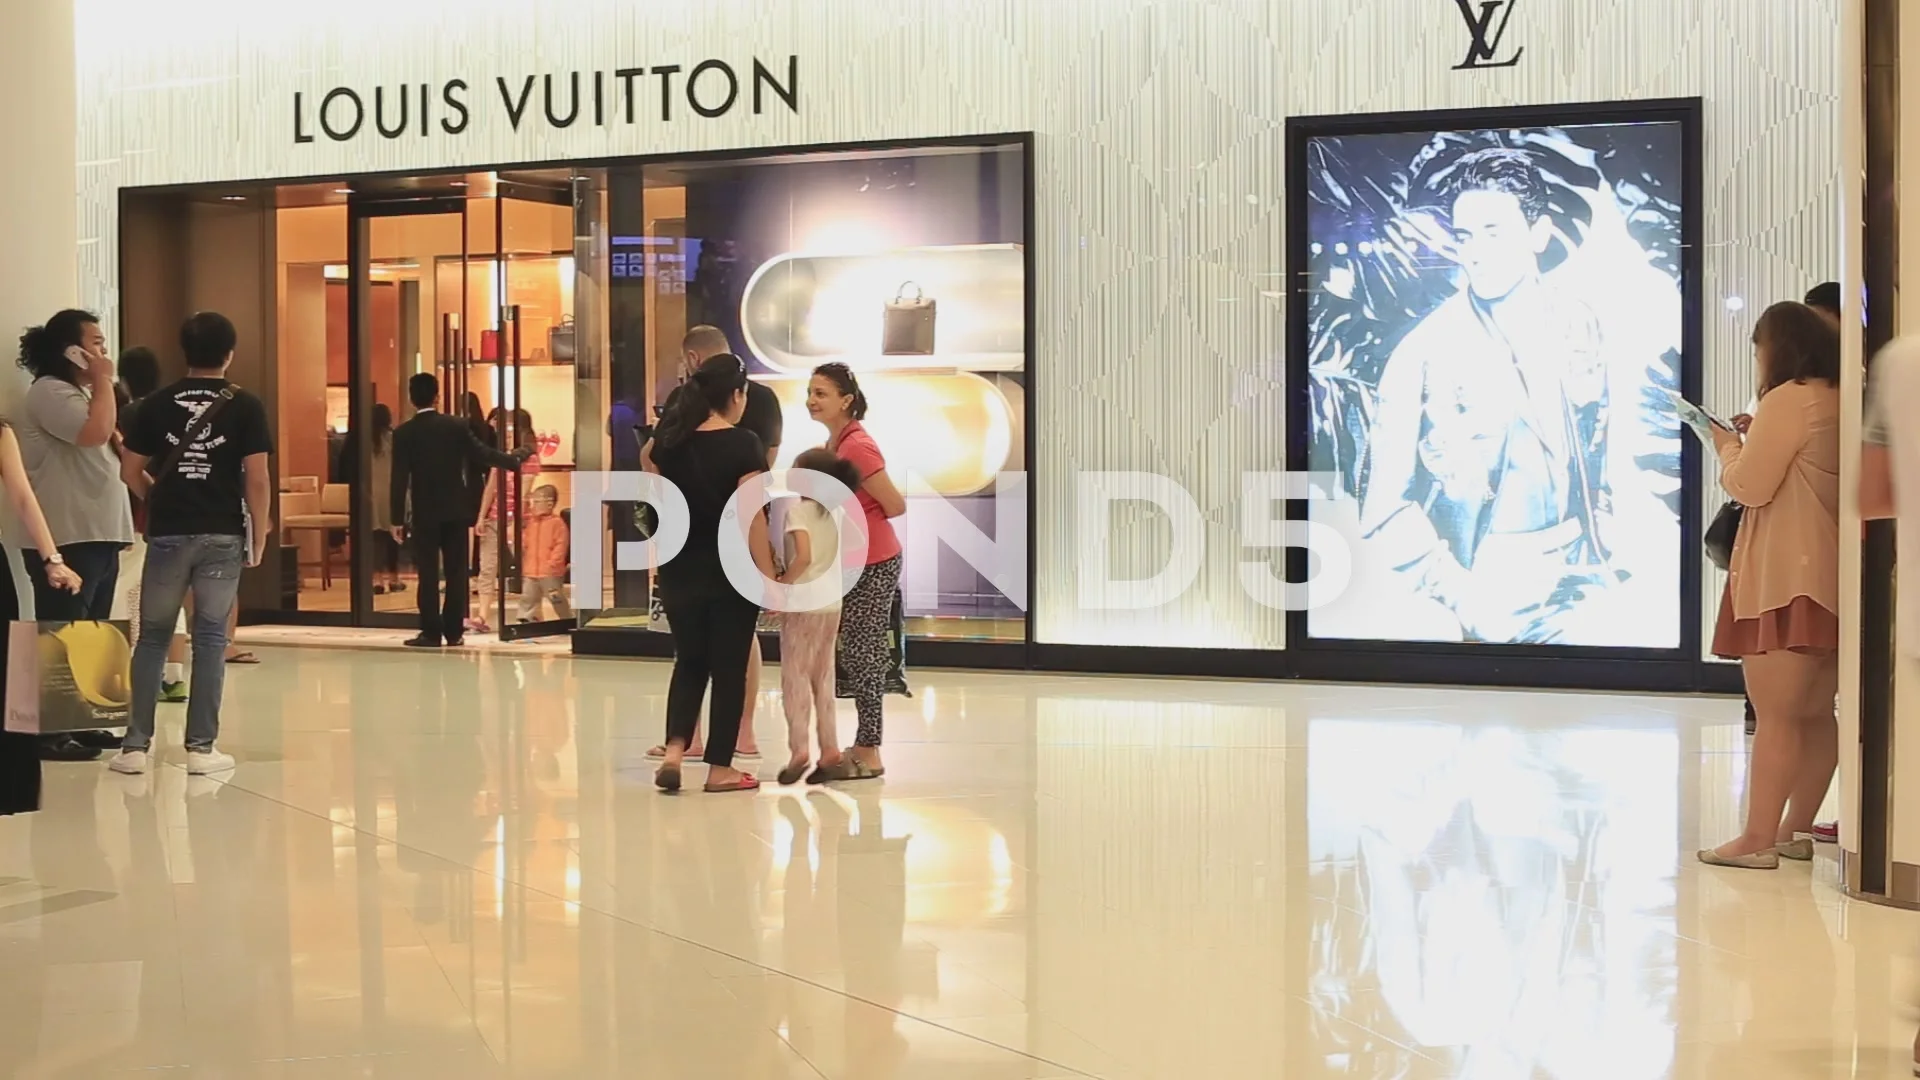 People seen walking past a Louis Vuitton store in the area of